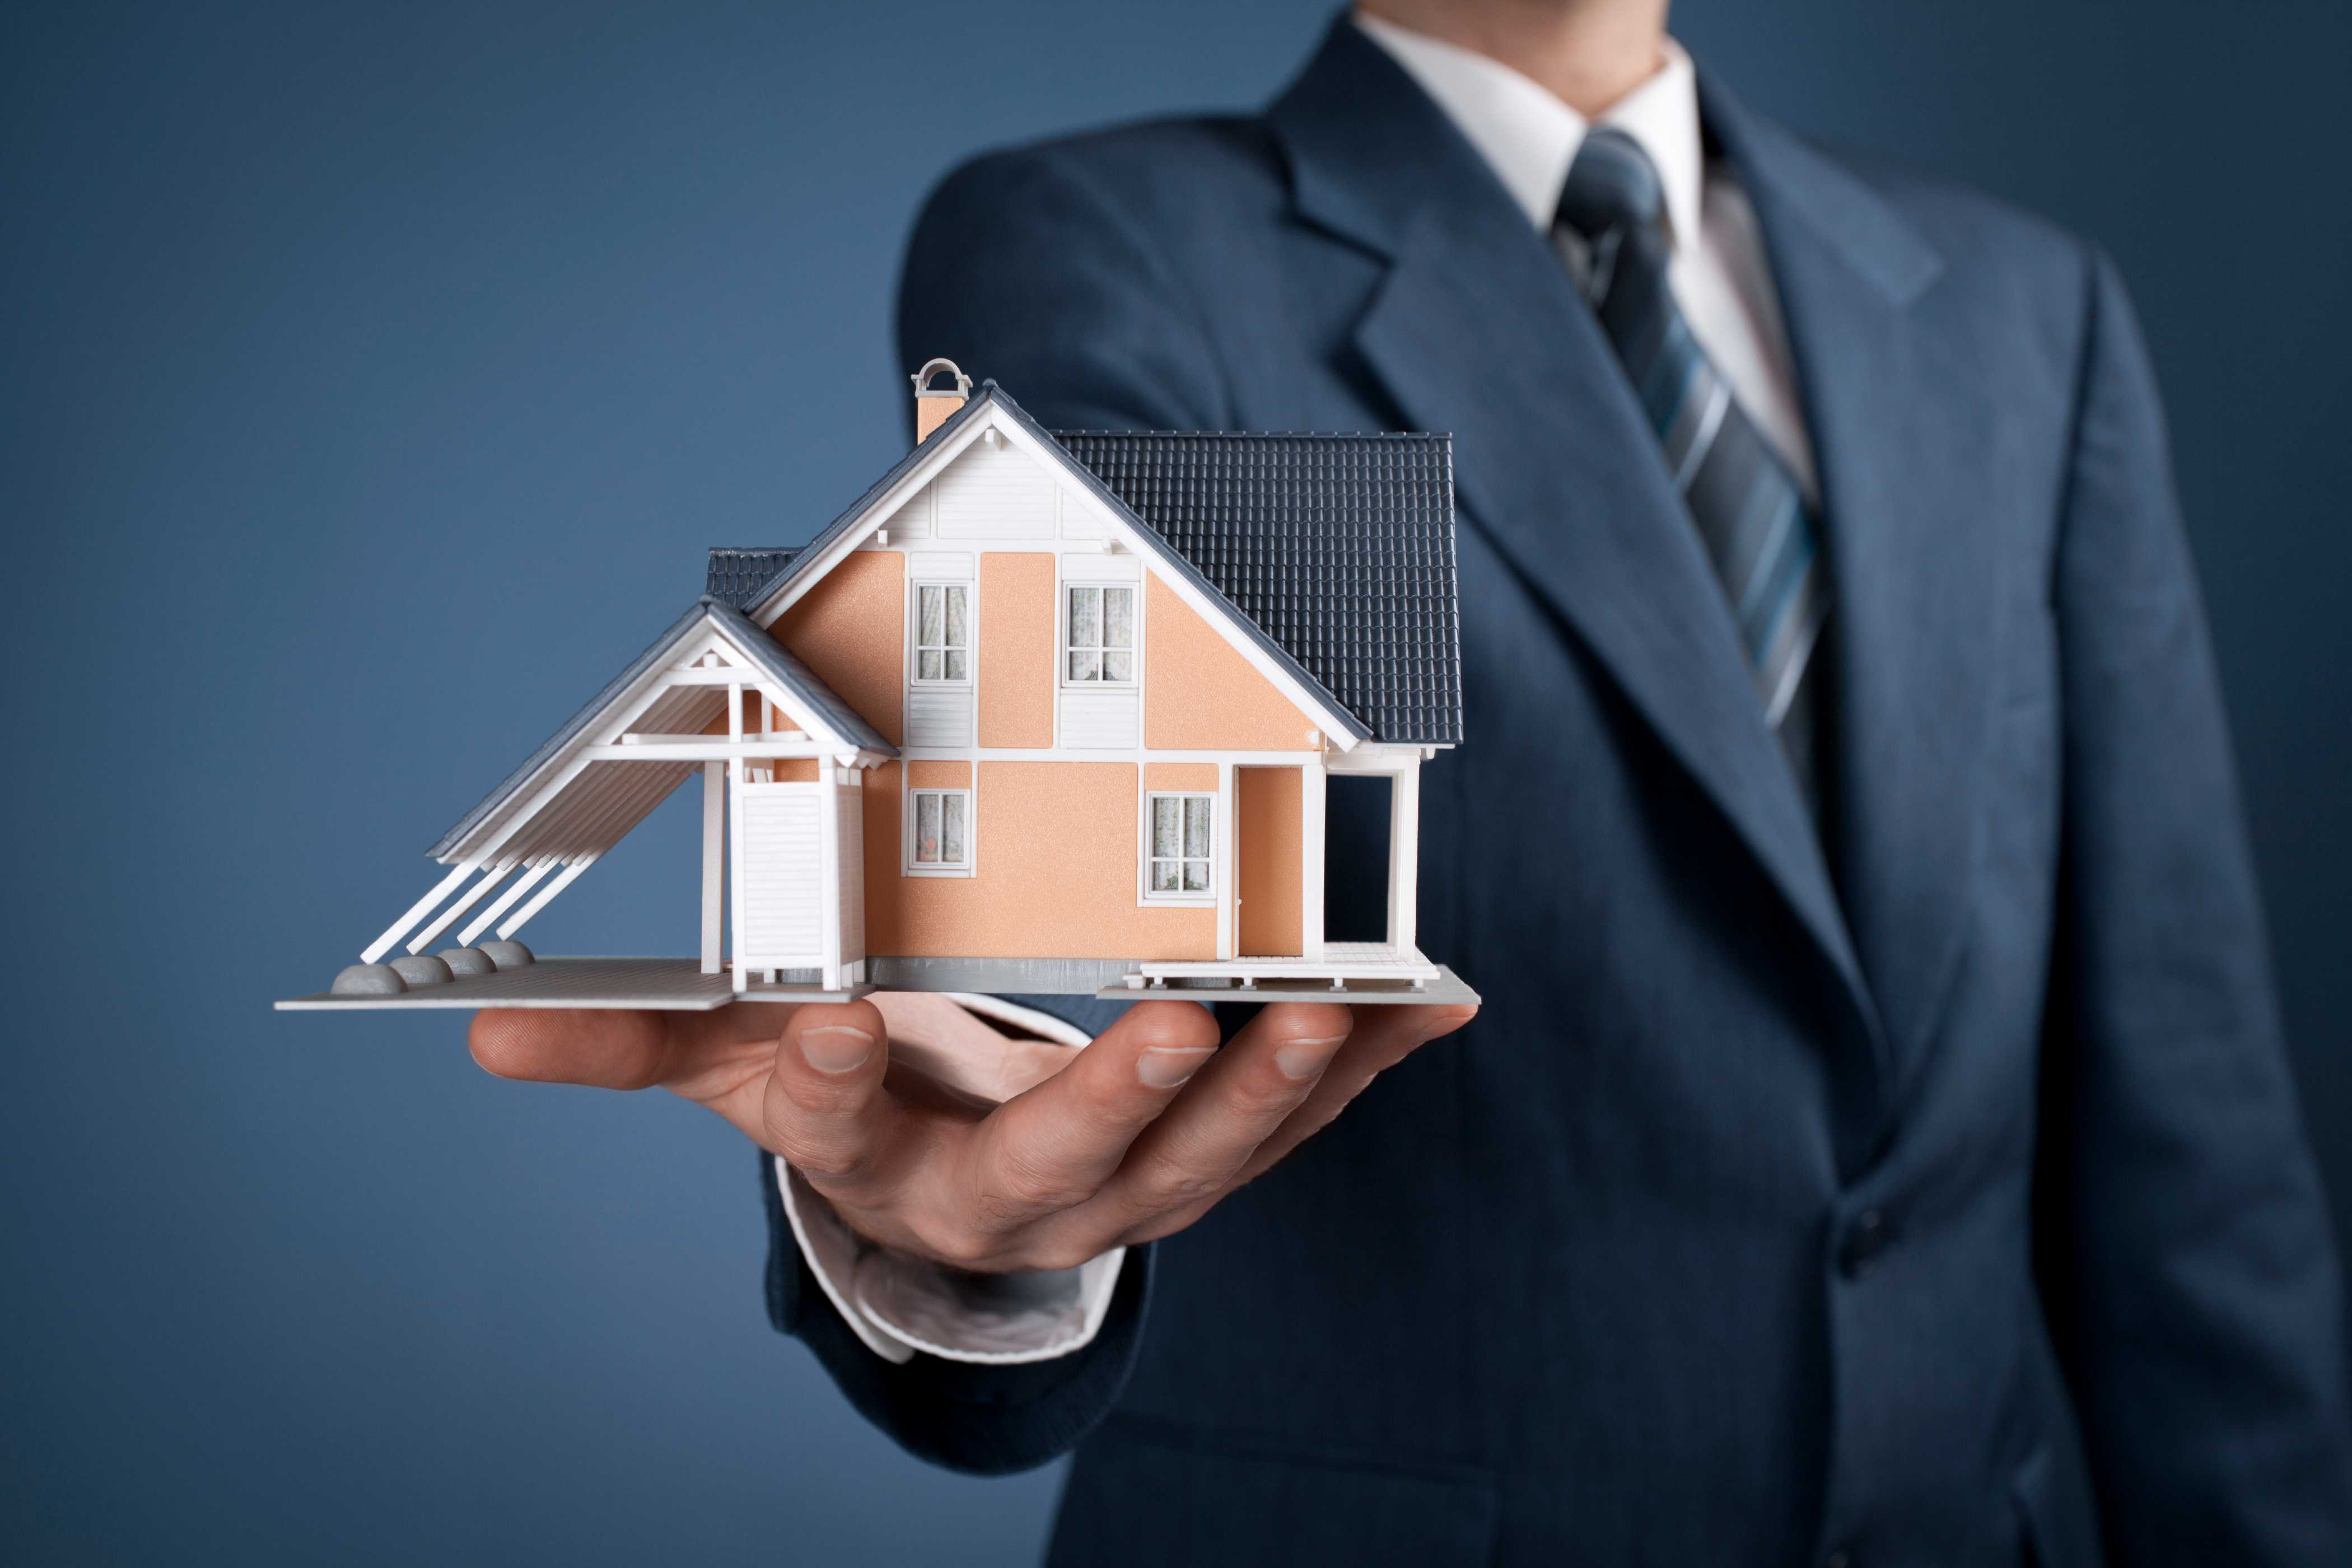 How to Buy Real eState Without Loan